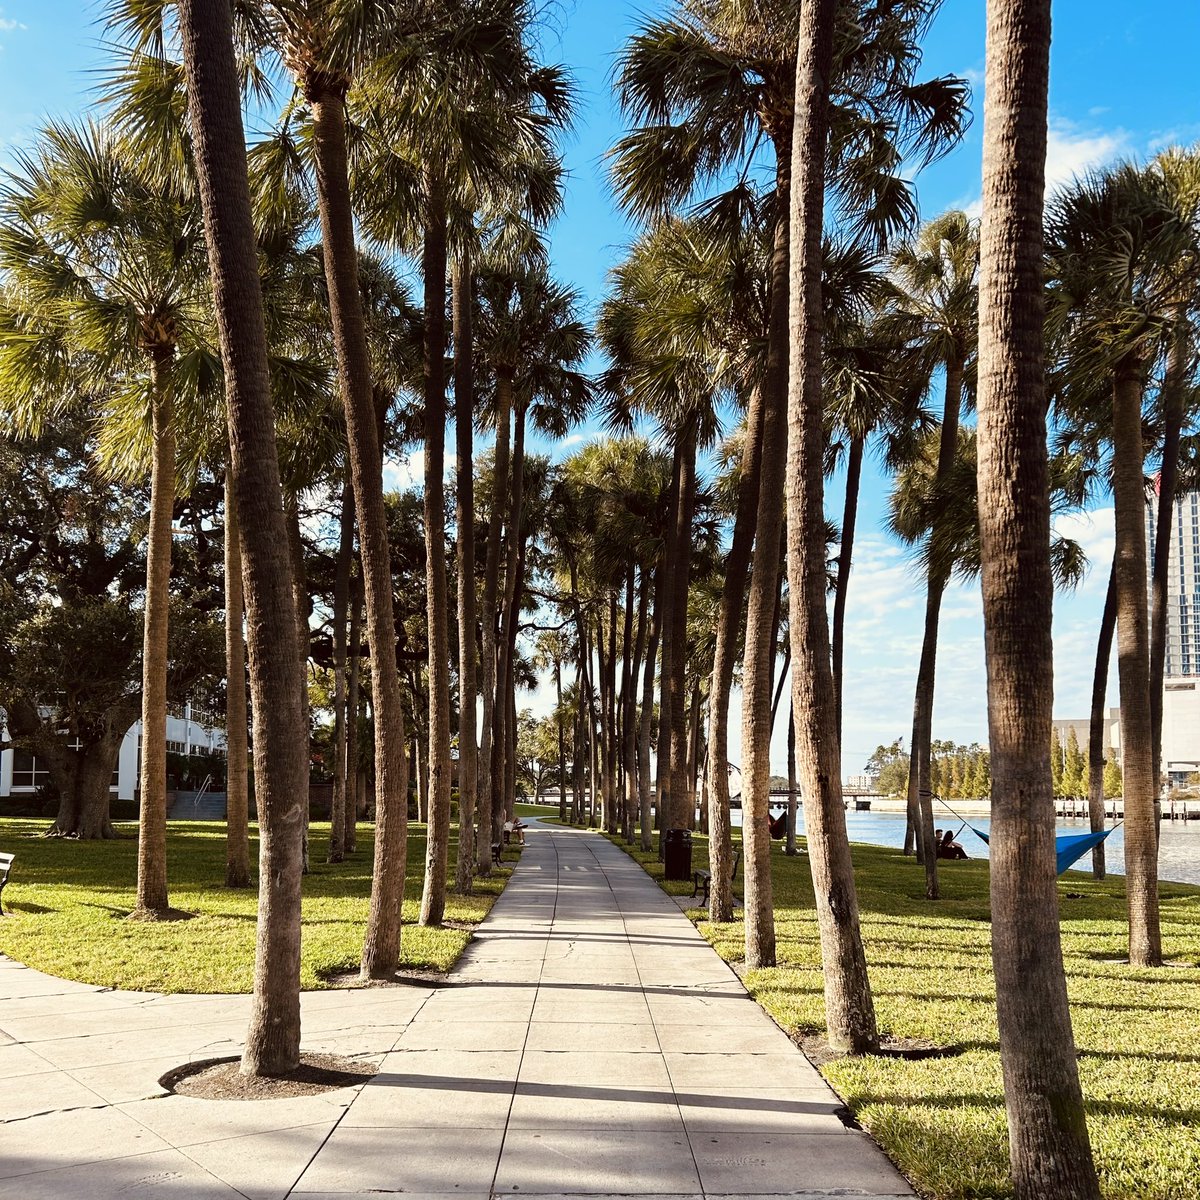 Had a great time at the residents and fellows endoscopic spine surgery course hosted by Joimax! Nice to briefly spend some time in the Tampa sun as well ☀️ 🌴